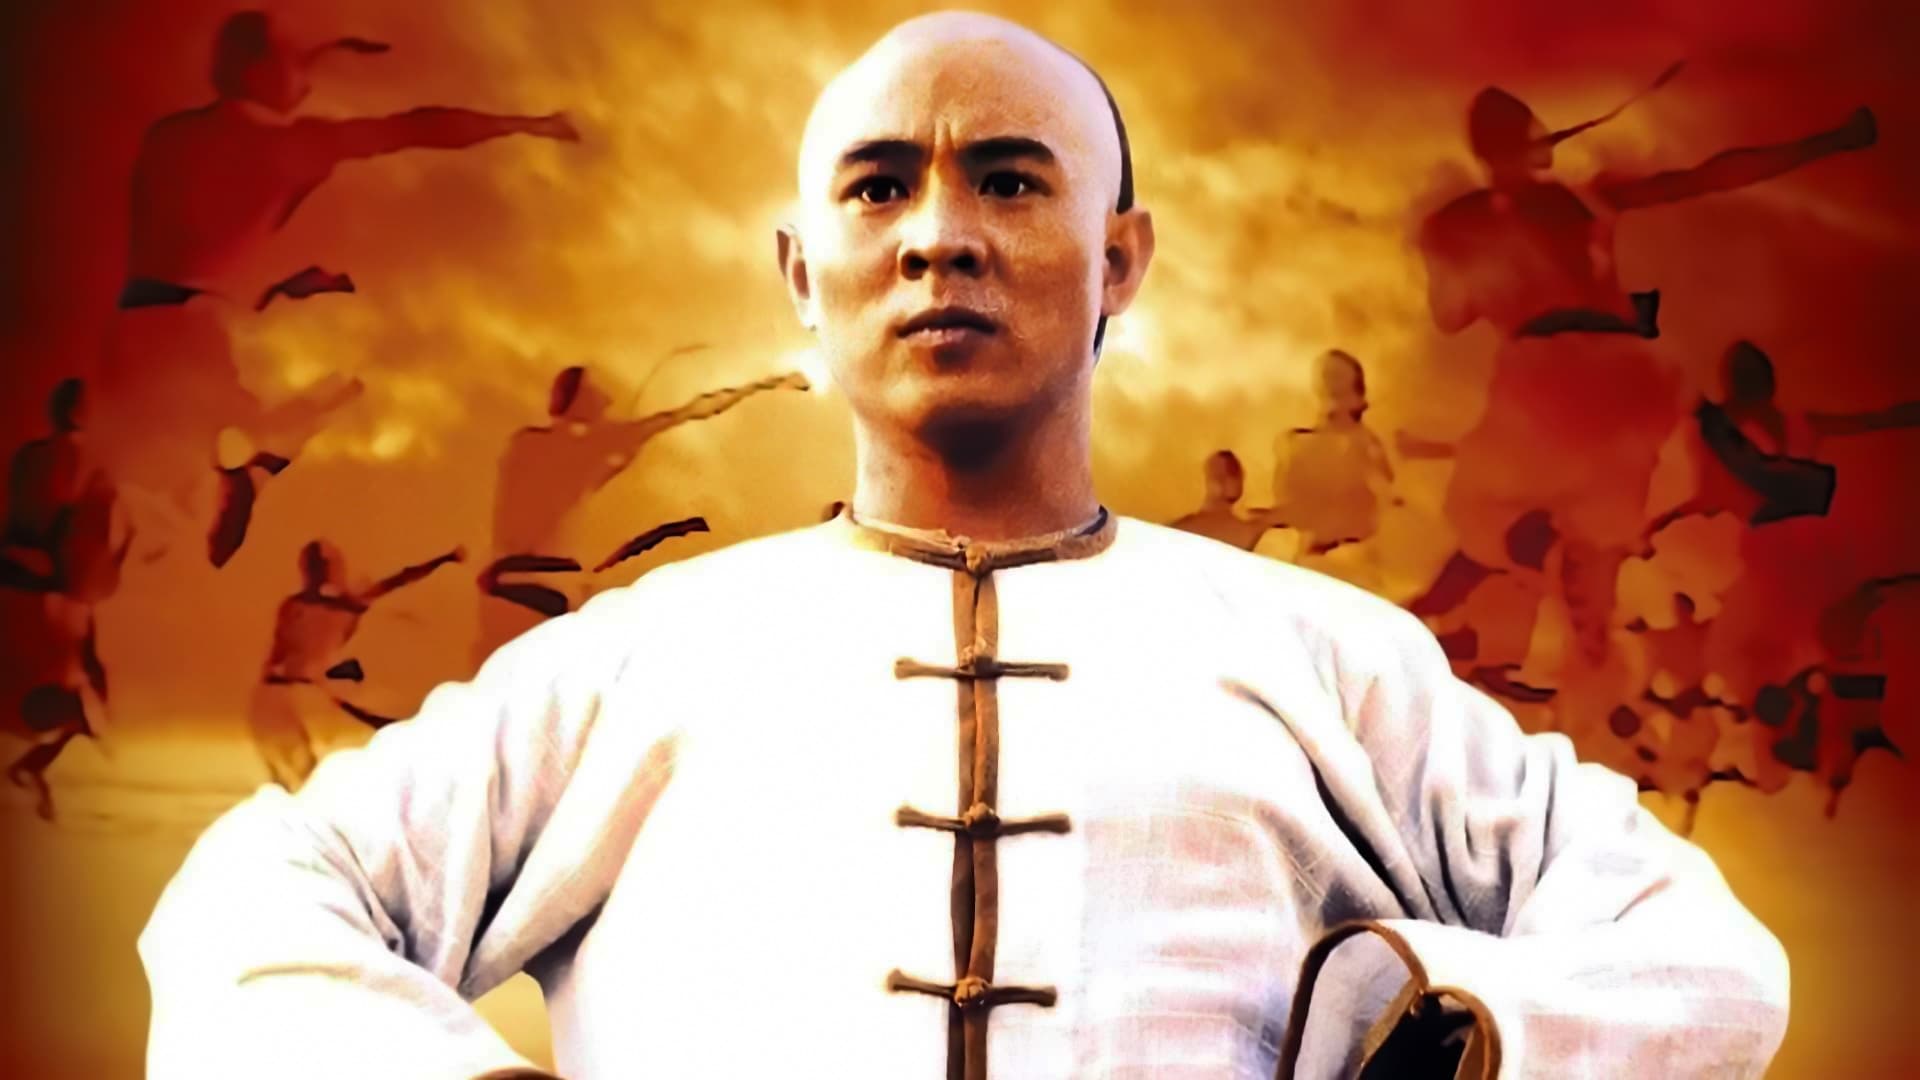 Poster Phim Hoàng Phi Hồng (Once Upon A Time In China)